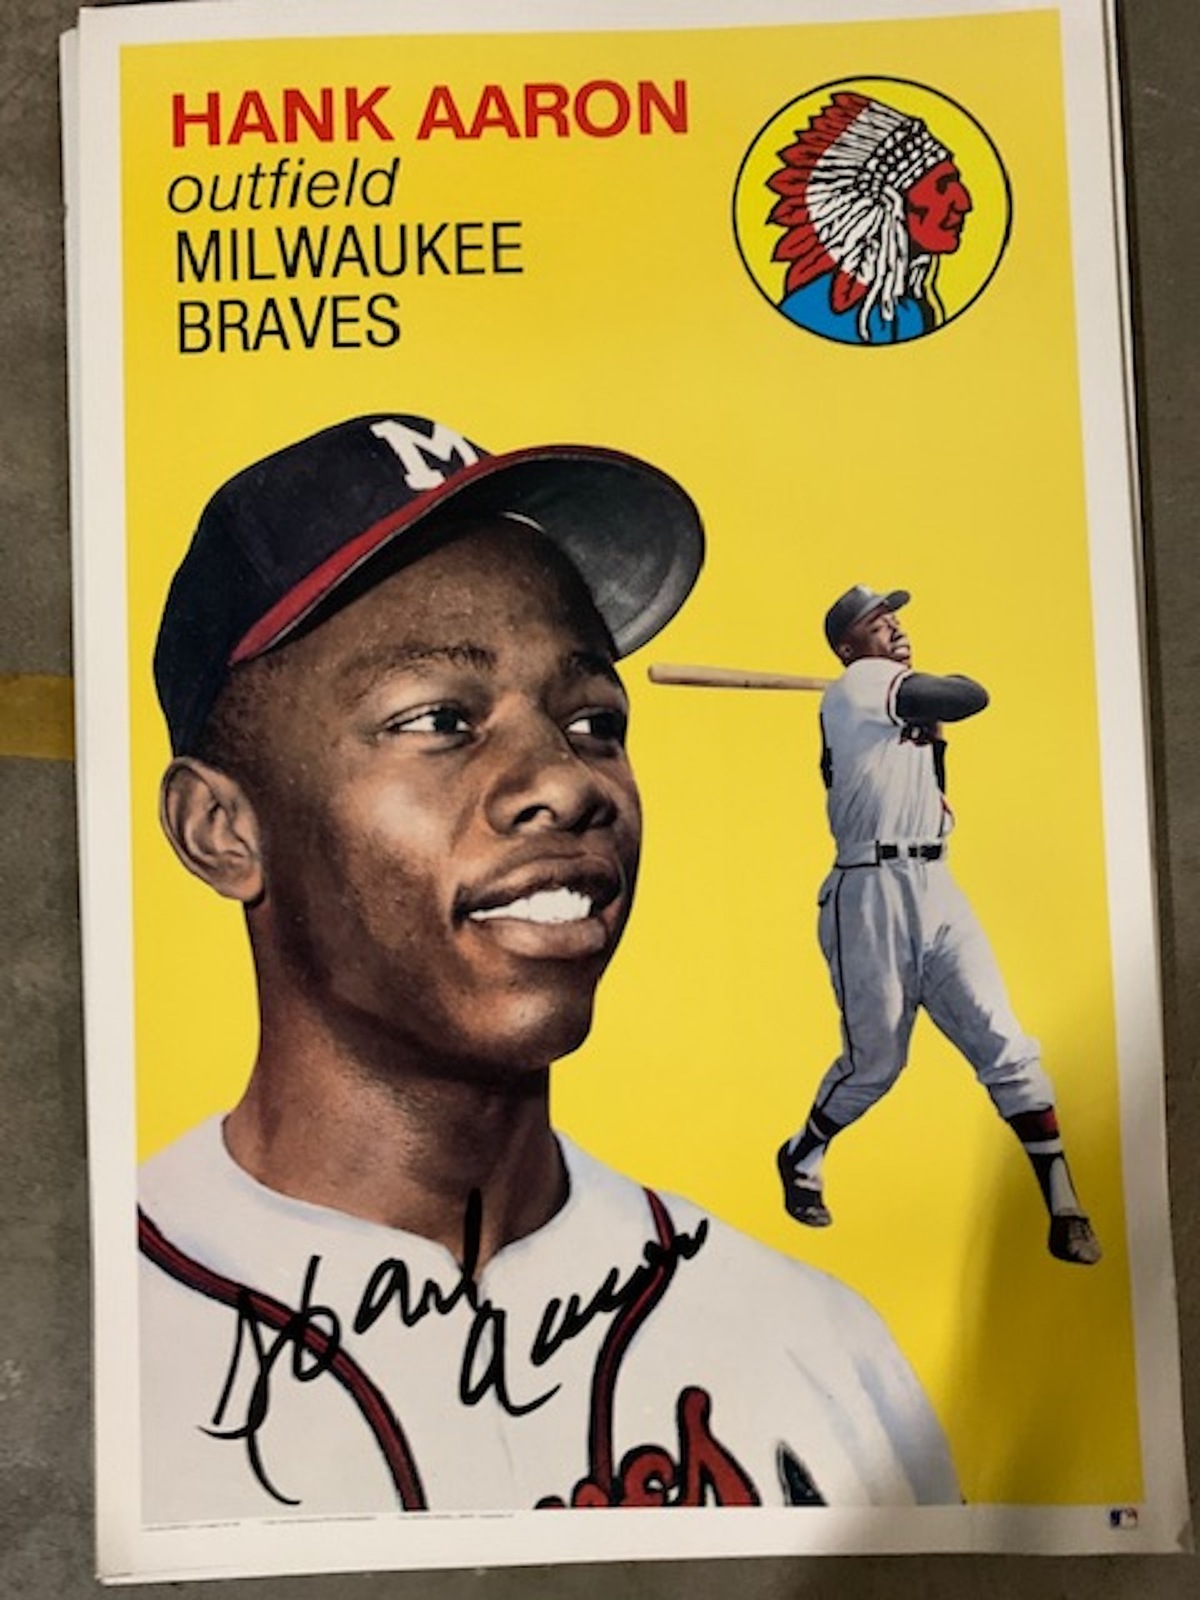 Primary image for Hank Aaron Giant baseball card poster